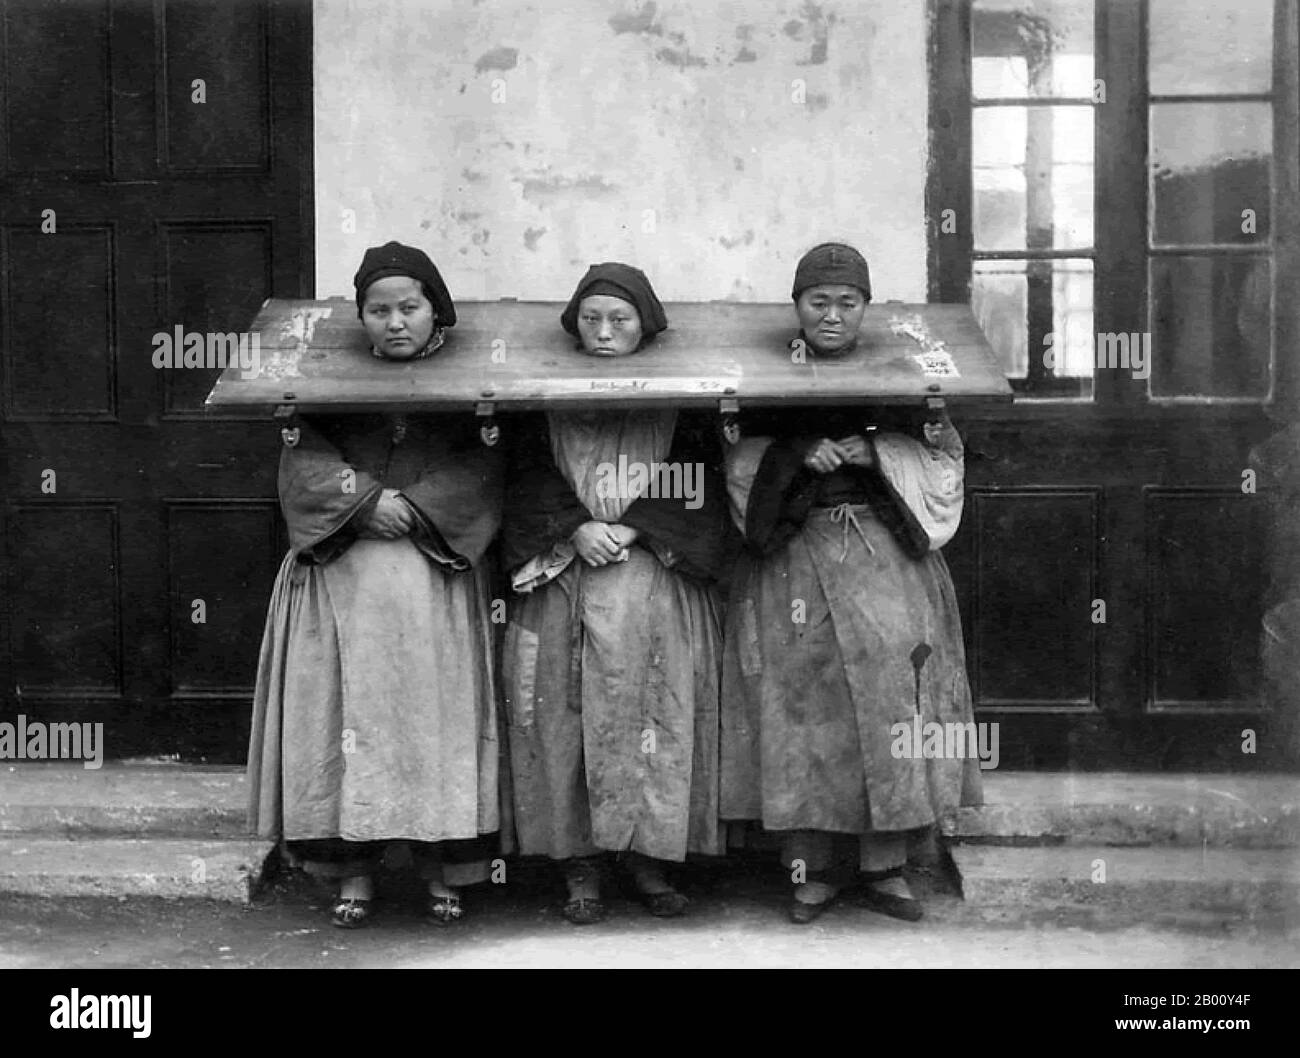 China: Three women wearing a cangue or form of portable stocks as a punishment, c. 1900.  A cangue was a device that was used for public humiliation and corporal punishment in China and some other parts of East Asia and Southeast Asia until the early years of the 20th century. It was somewhat similar to the pillory used for punishment in the West, except that the board of the cangue was not fixed to a base, and had to be carried around by the prisoner. Stock Photo